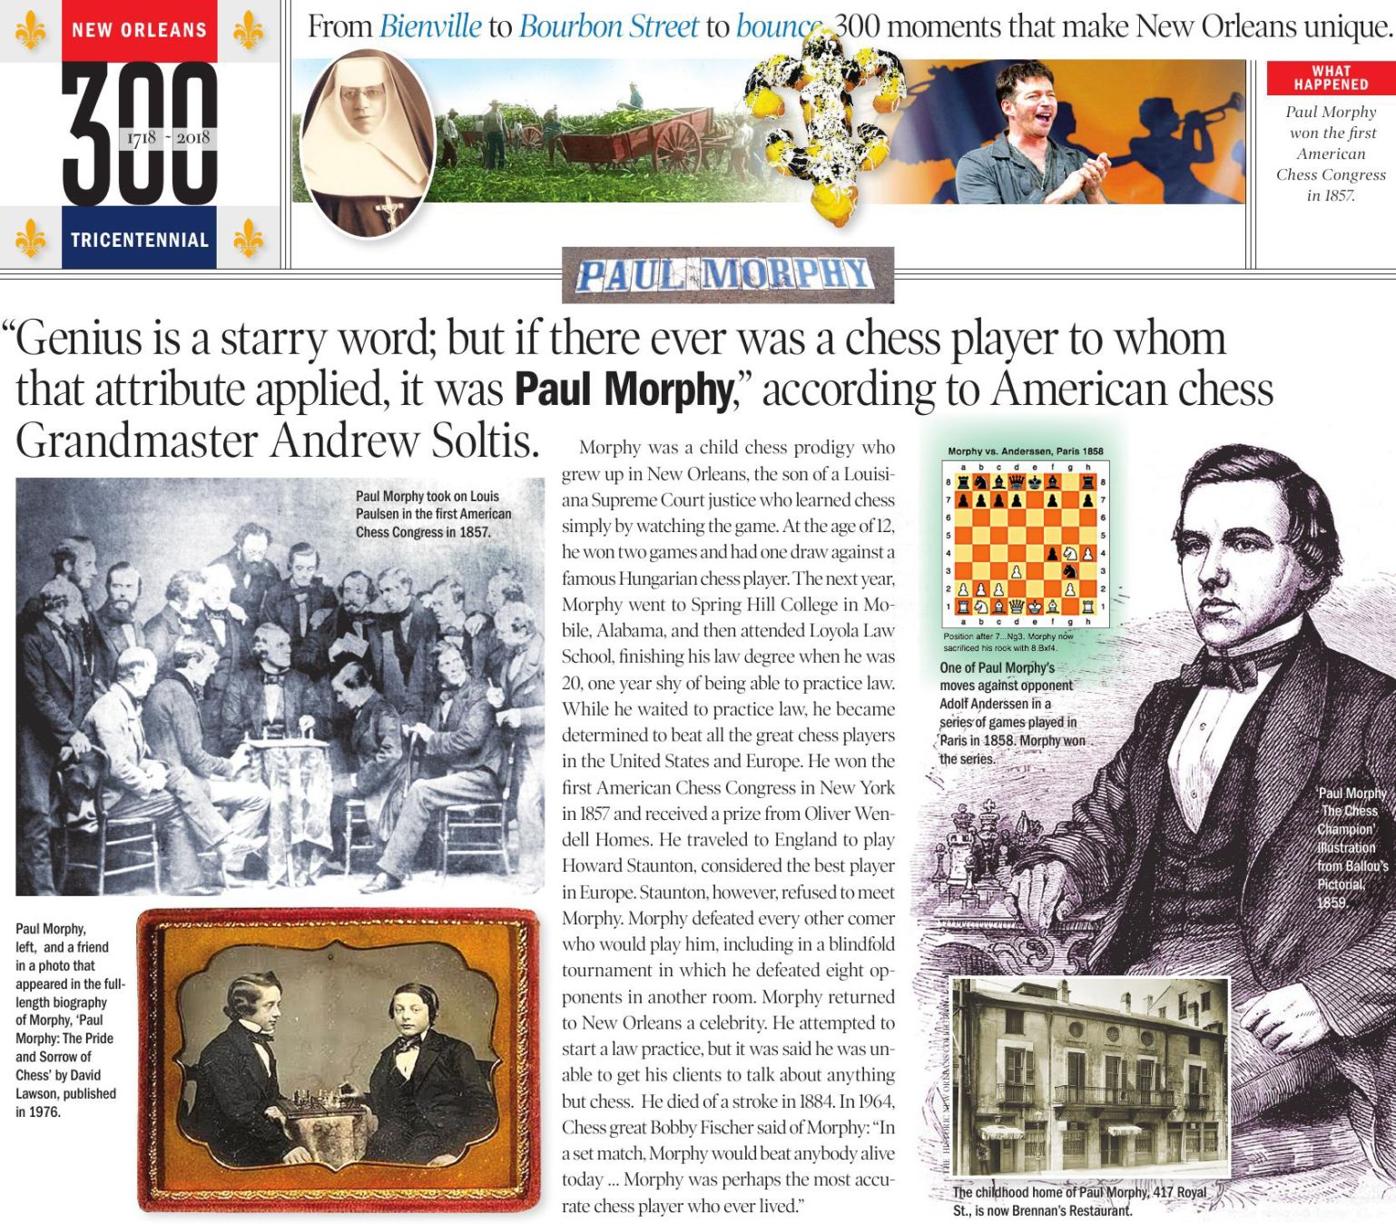 Paul Morphy is considered one of the most accurate and exciting